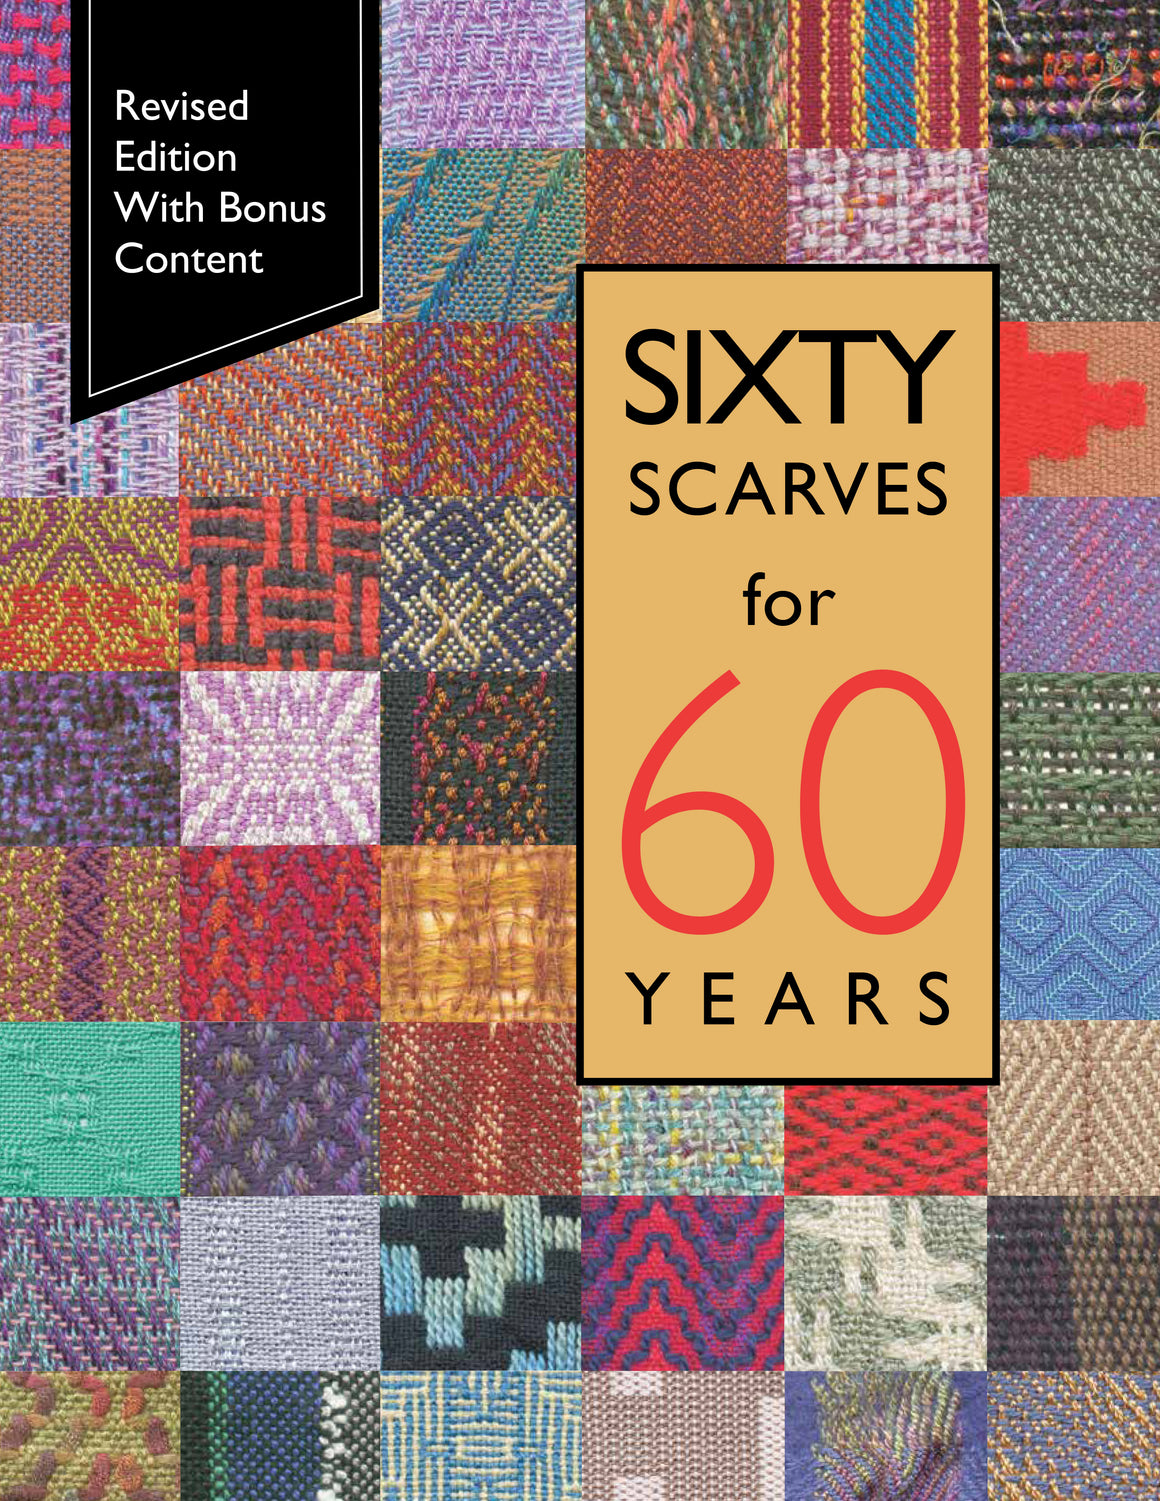 Sixty Scarves for 60 Years (Second Edition)